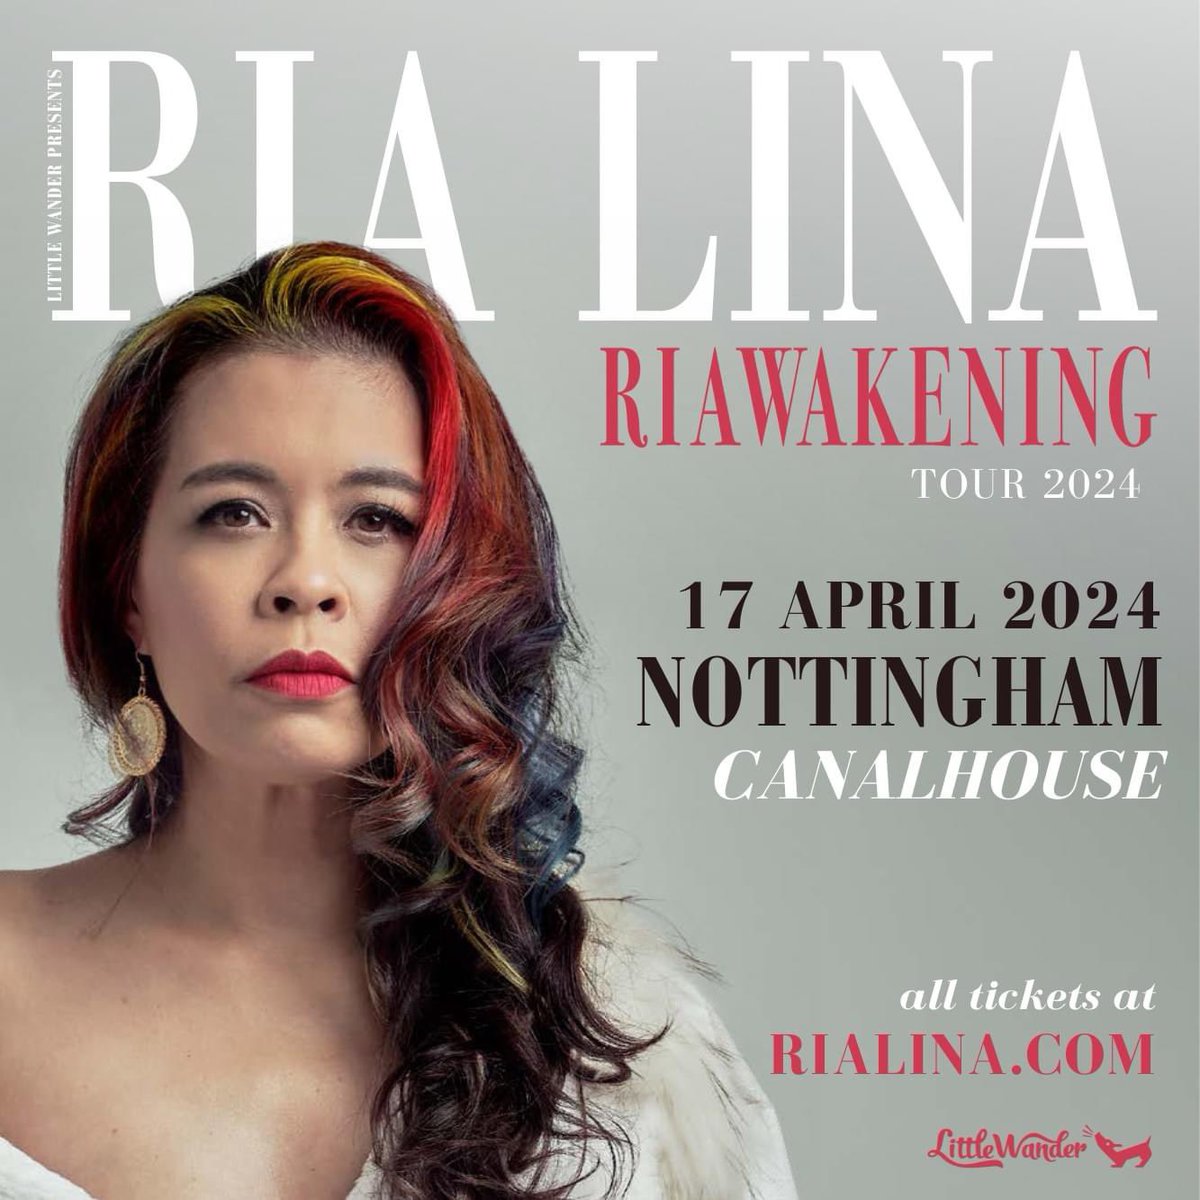 Coming soon to the Canalhouse..... Ria Lina As seen on: BBC’s Live At The Apollo, Have I Got News For You, The Now Show and Mock The Week Wednesday 17th April - wegottickets.com/event/597365